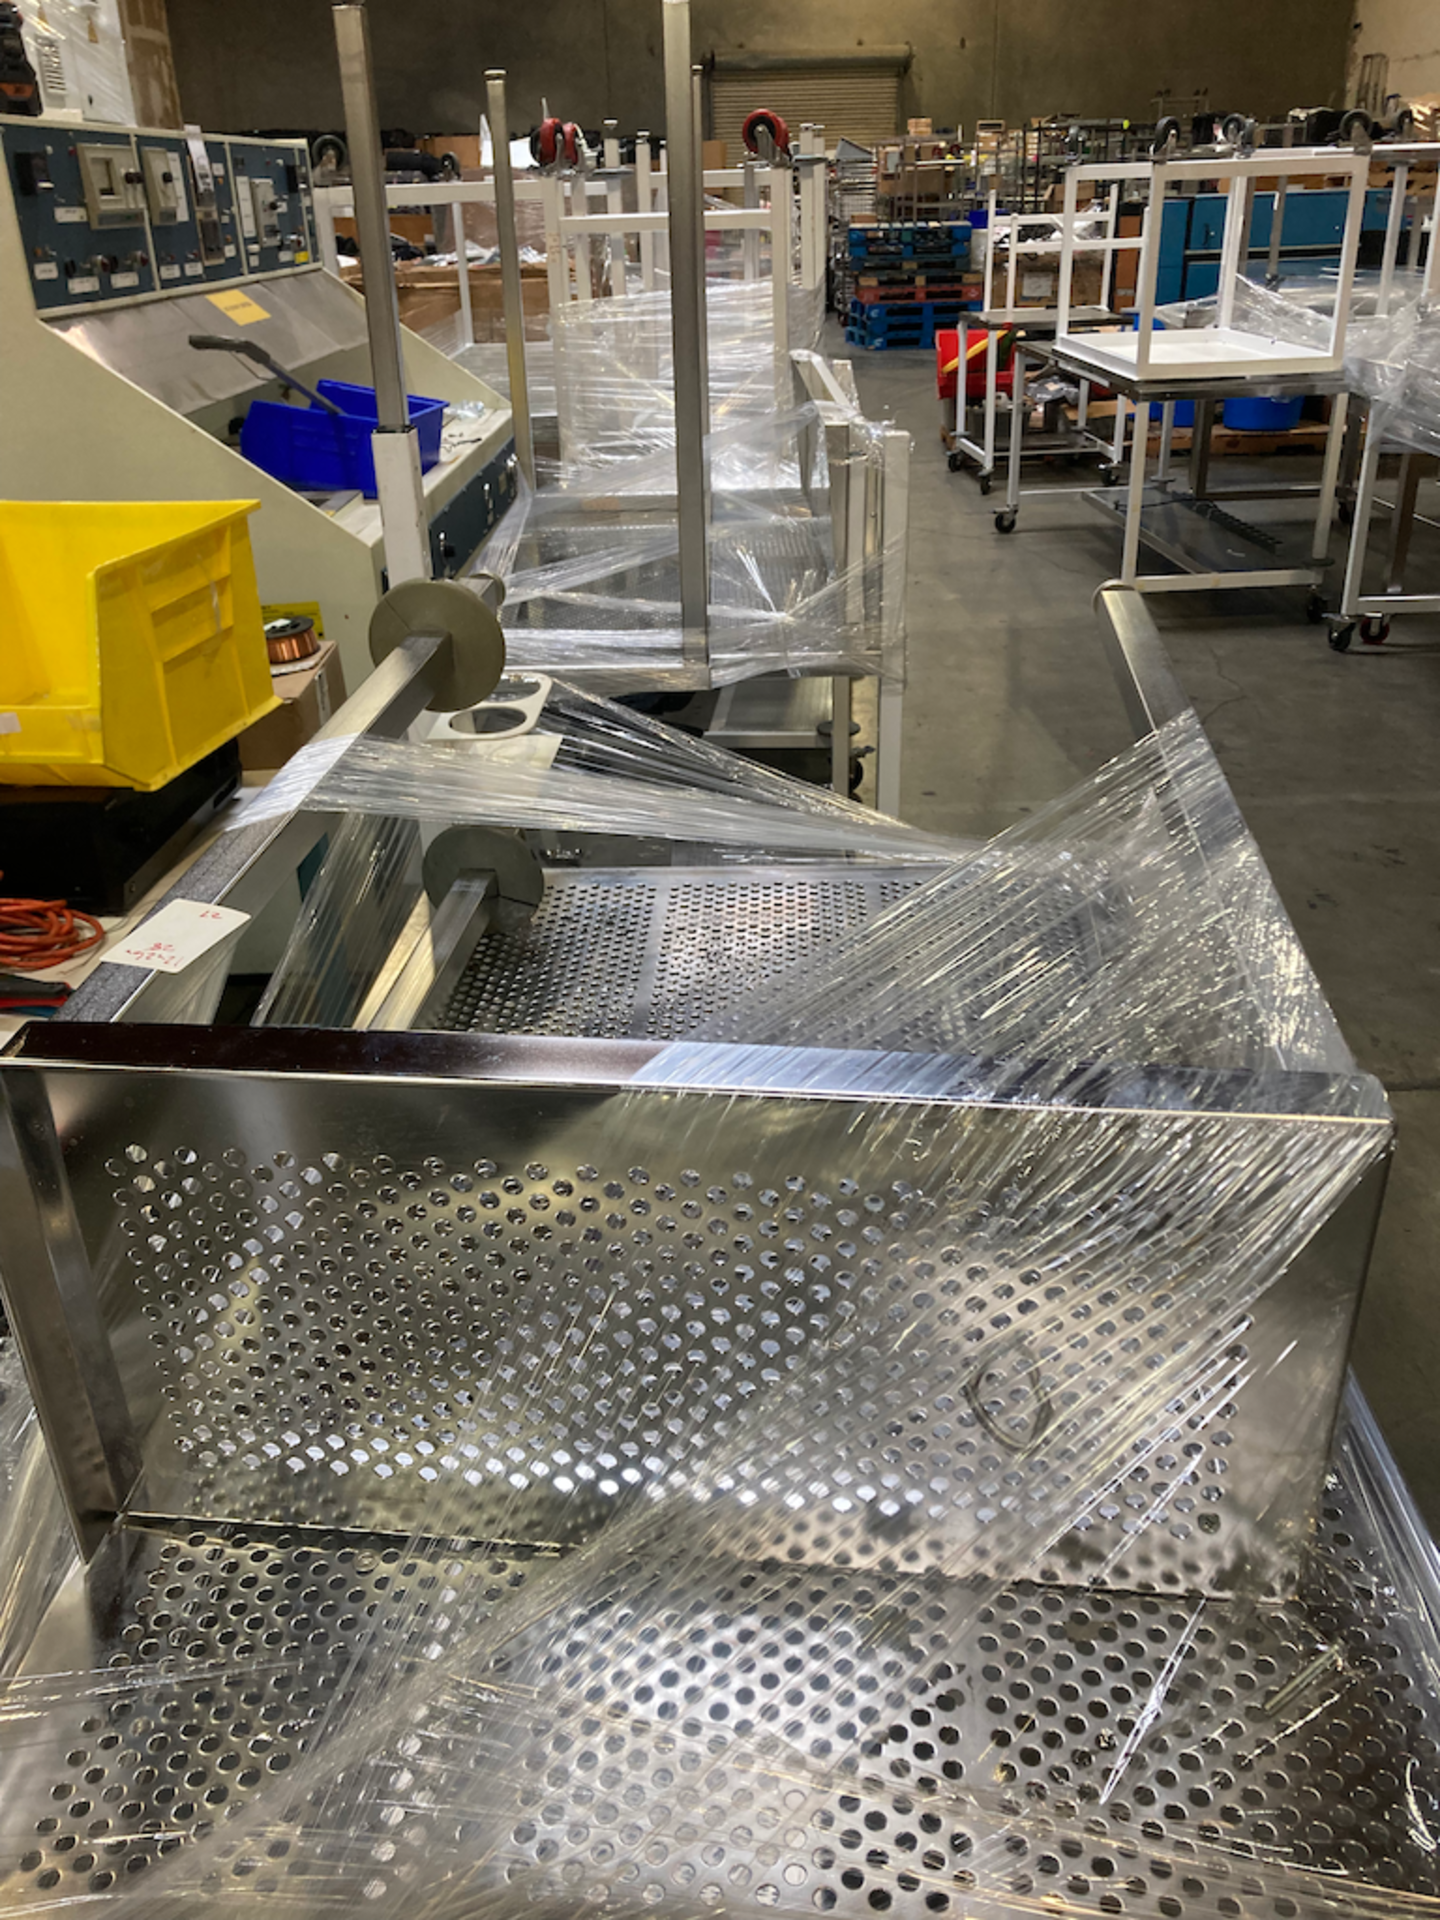 26 x 12 x 28 Perforated Stainless Steel Cleanroom Table - Image 2 of 3